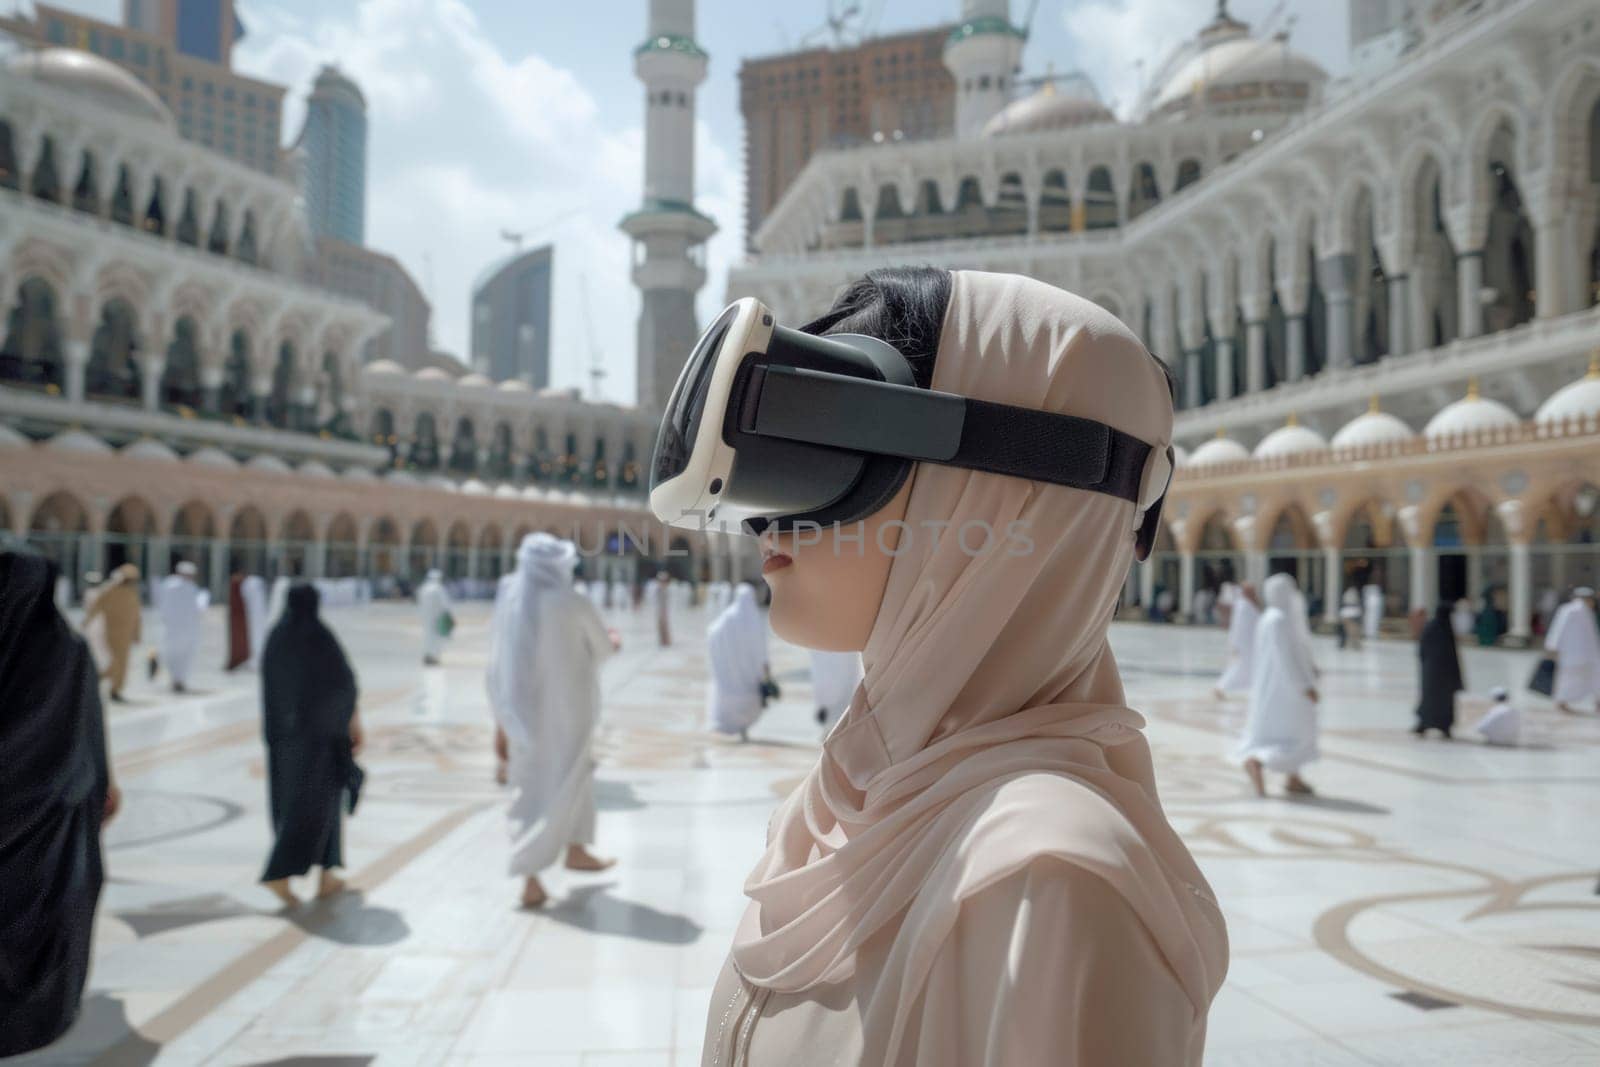 A woman in a hijab engages with a virtual reality headset, blending modern technology with traditional values. This scene captures the intersection of faith and innovation, as she virtually explores a holy site